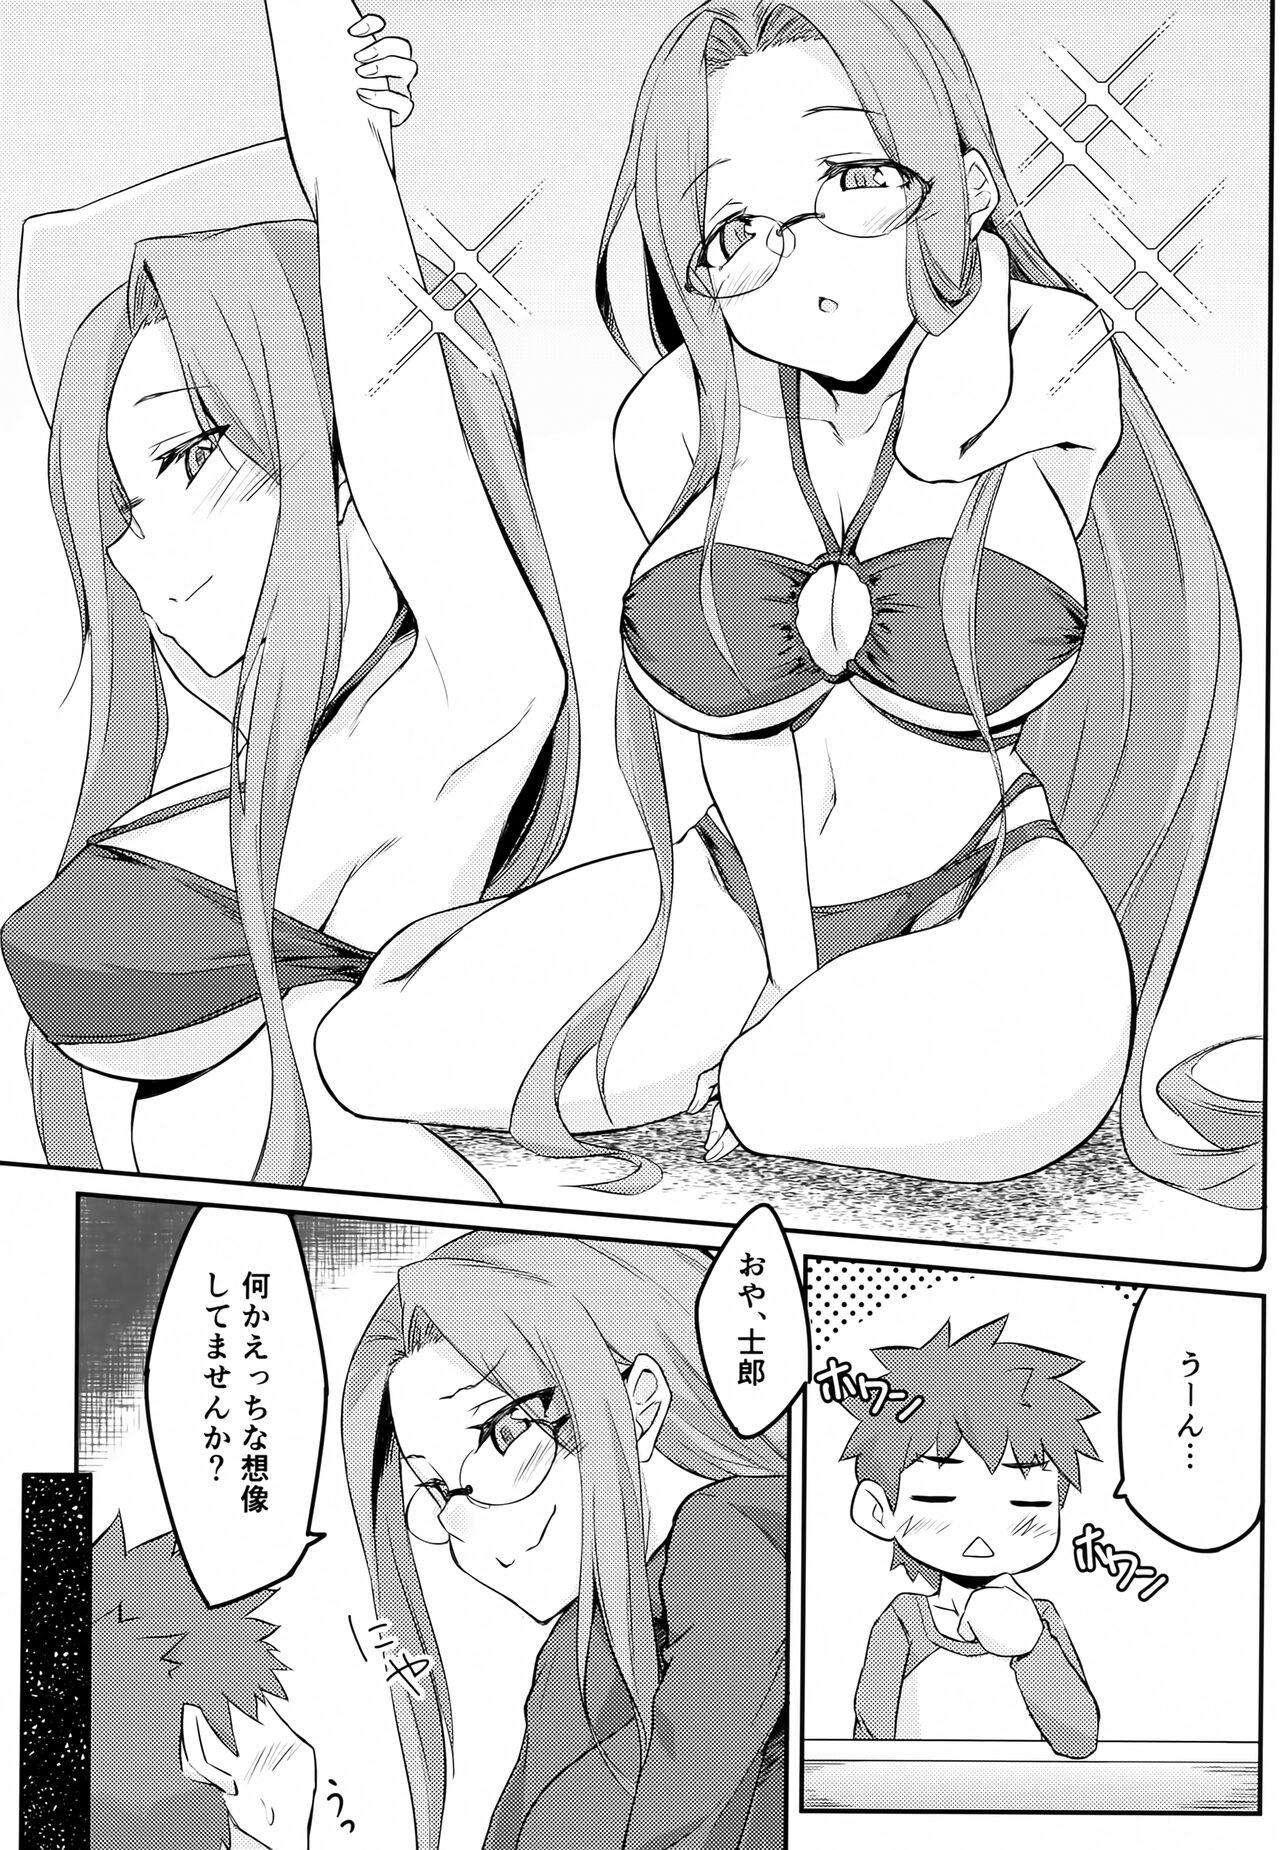 Daddy R15 - Fate stay night Lesbian Sex - Page 6